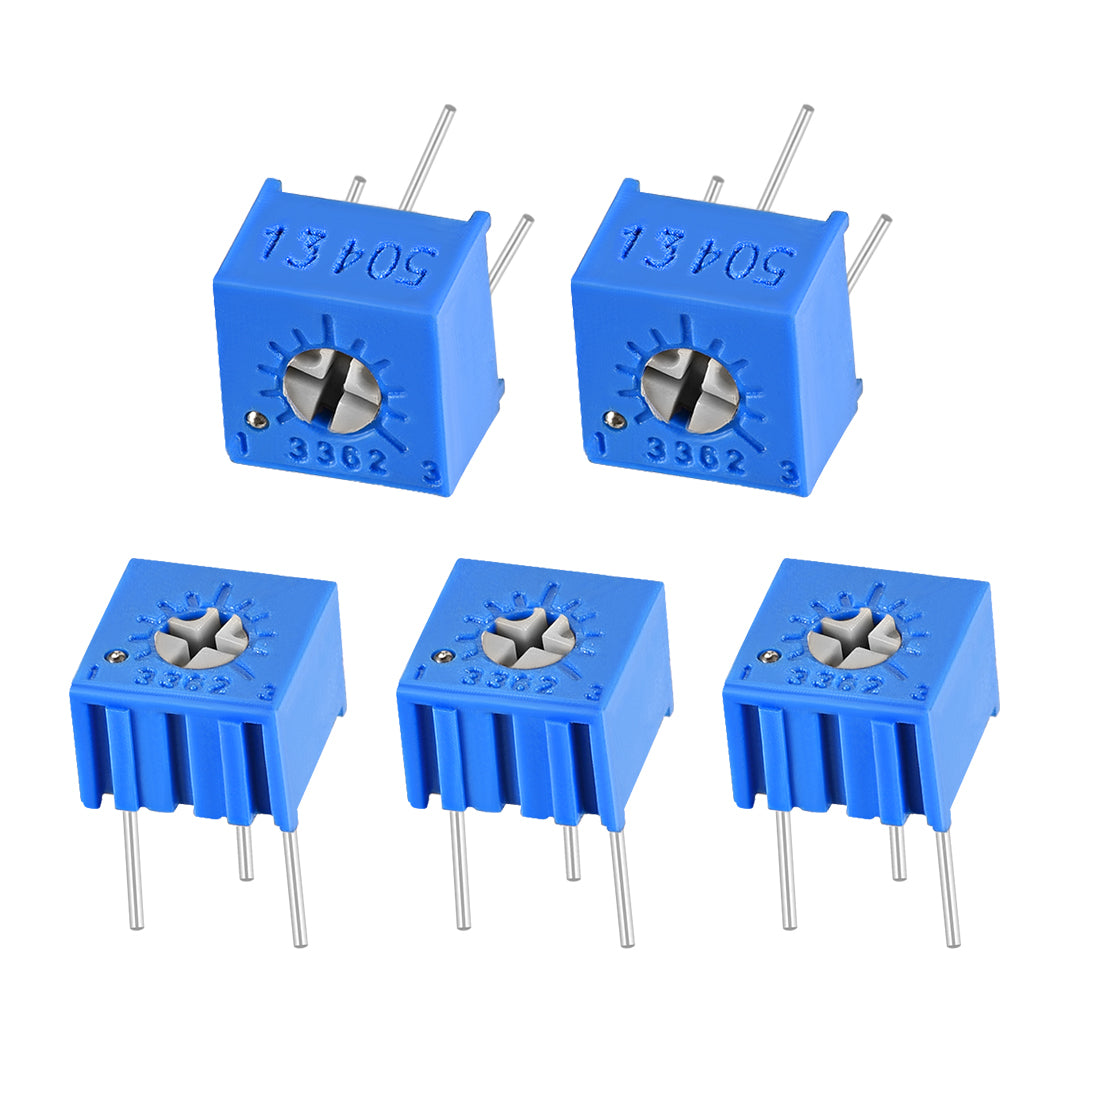 uxcell Uxcell 3362 Trimmer Potentiometer 500K Ohm Top Adjustment Horizontal Variable Resistors 5Pcs